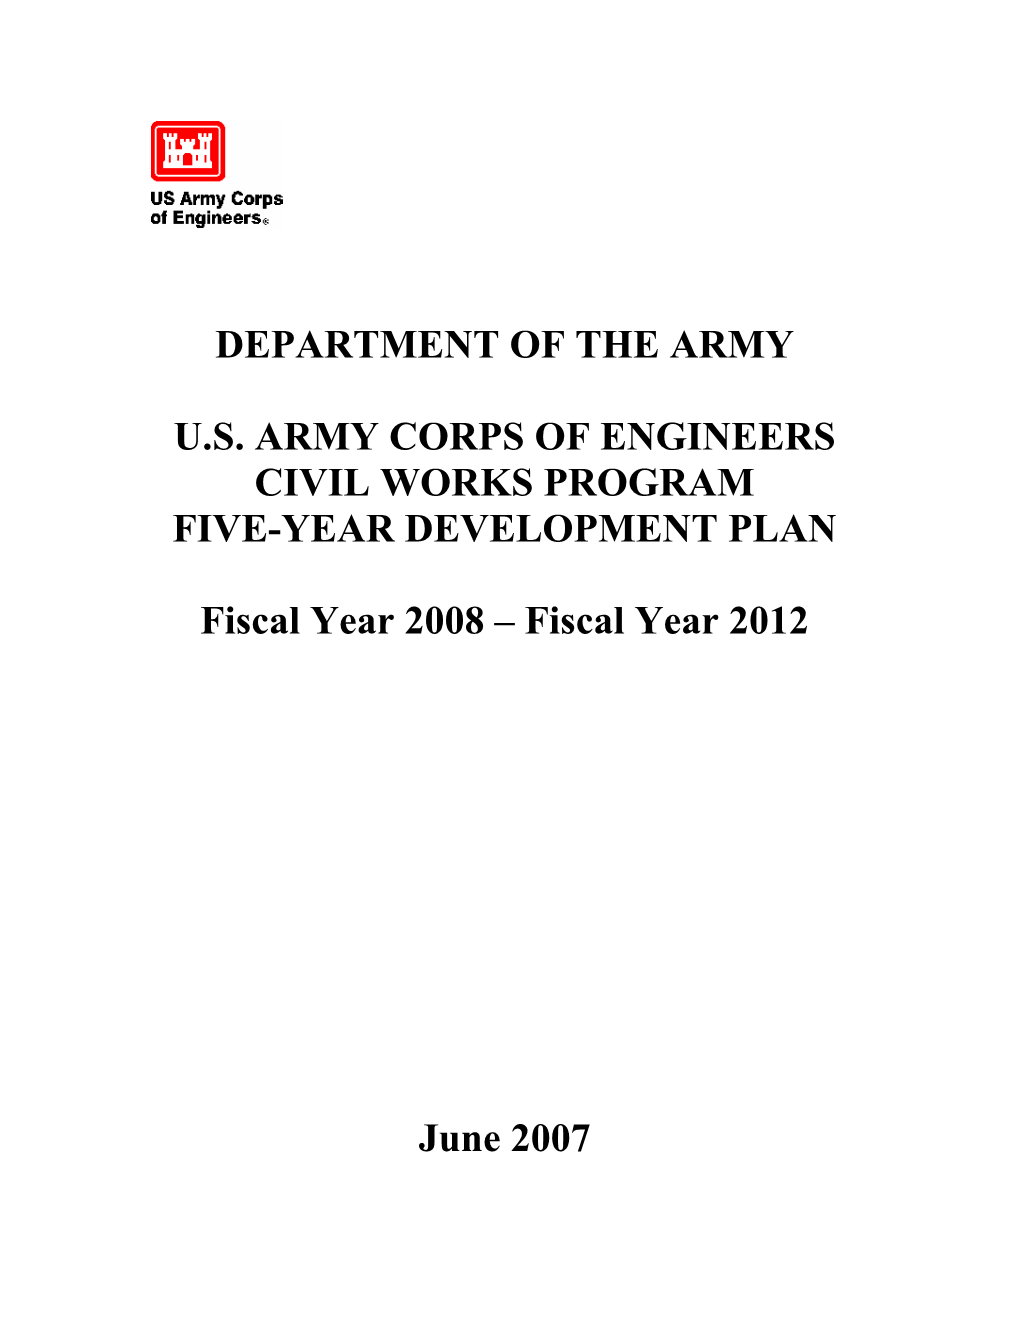 Department of the Army U.S. Army Corps of Engineers